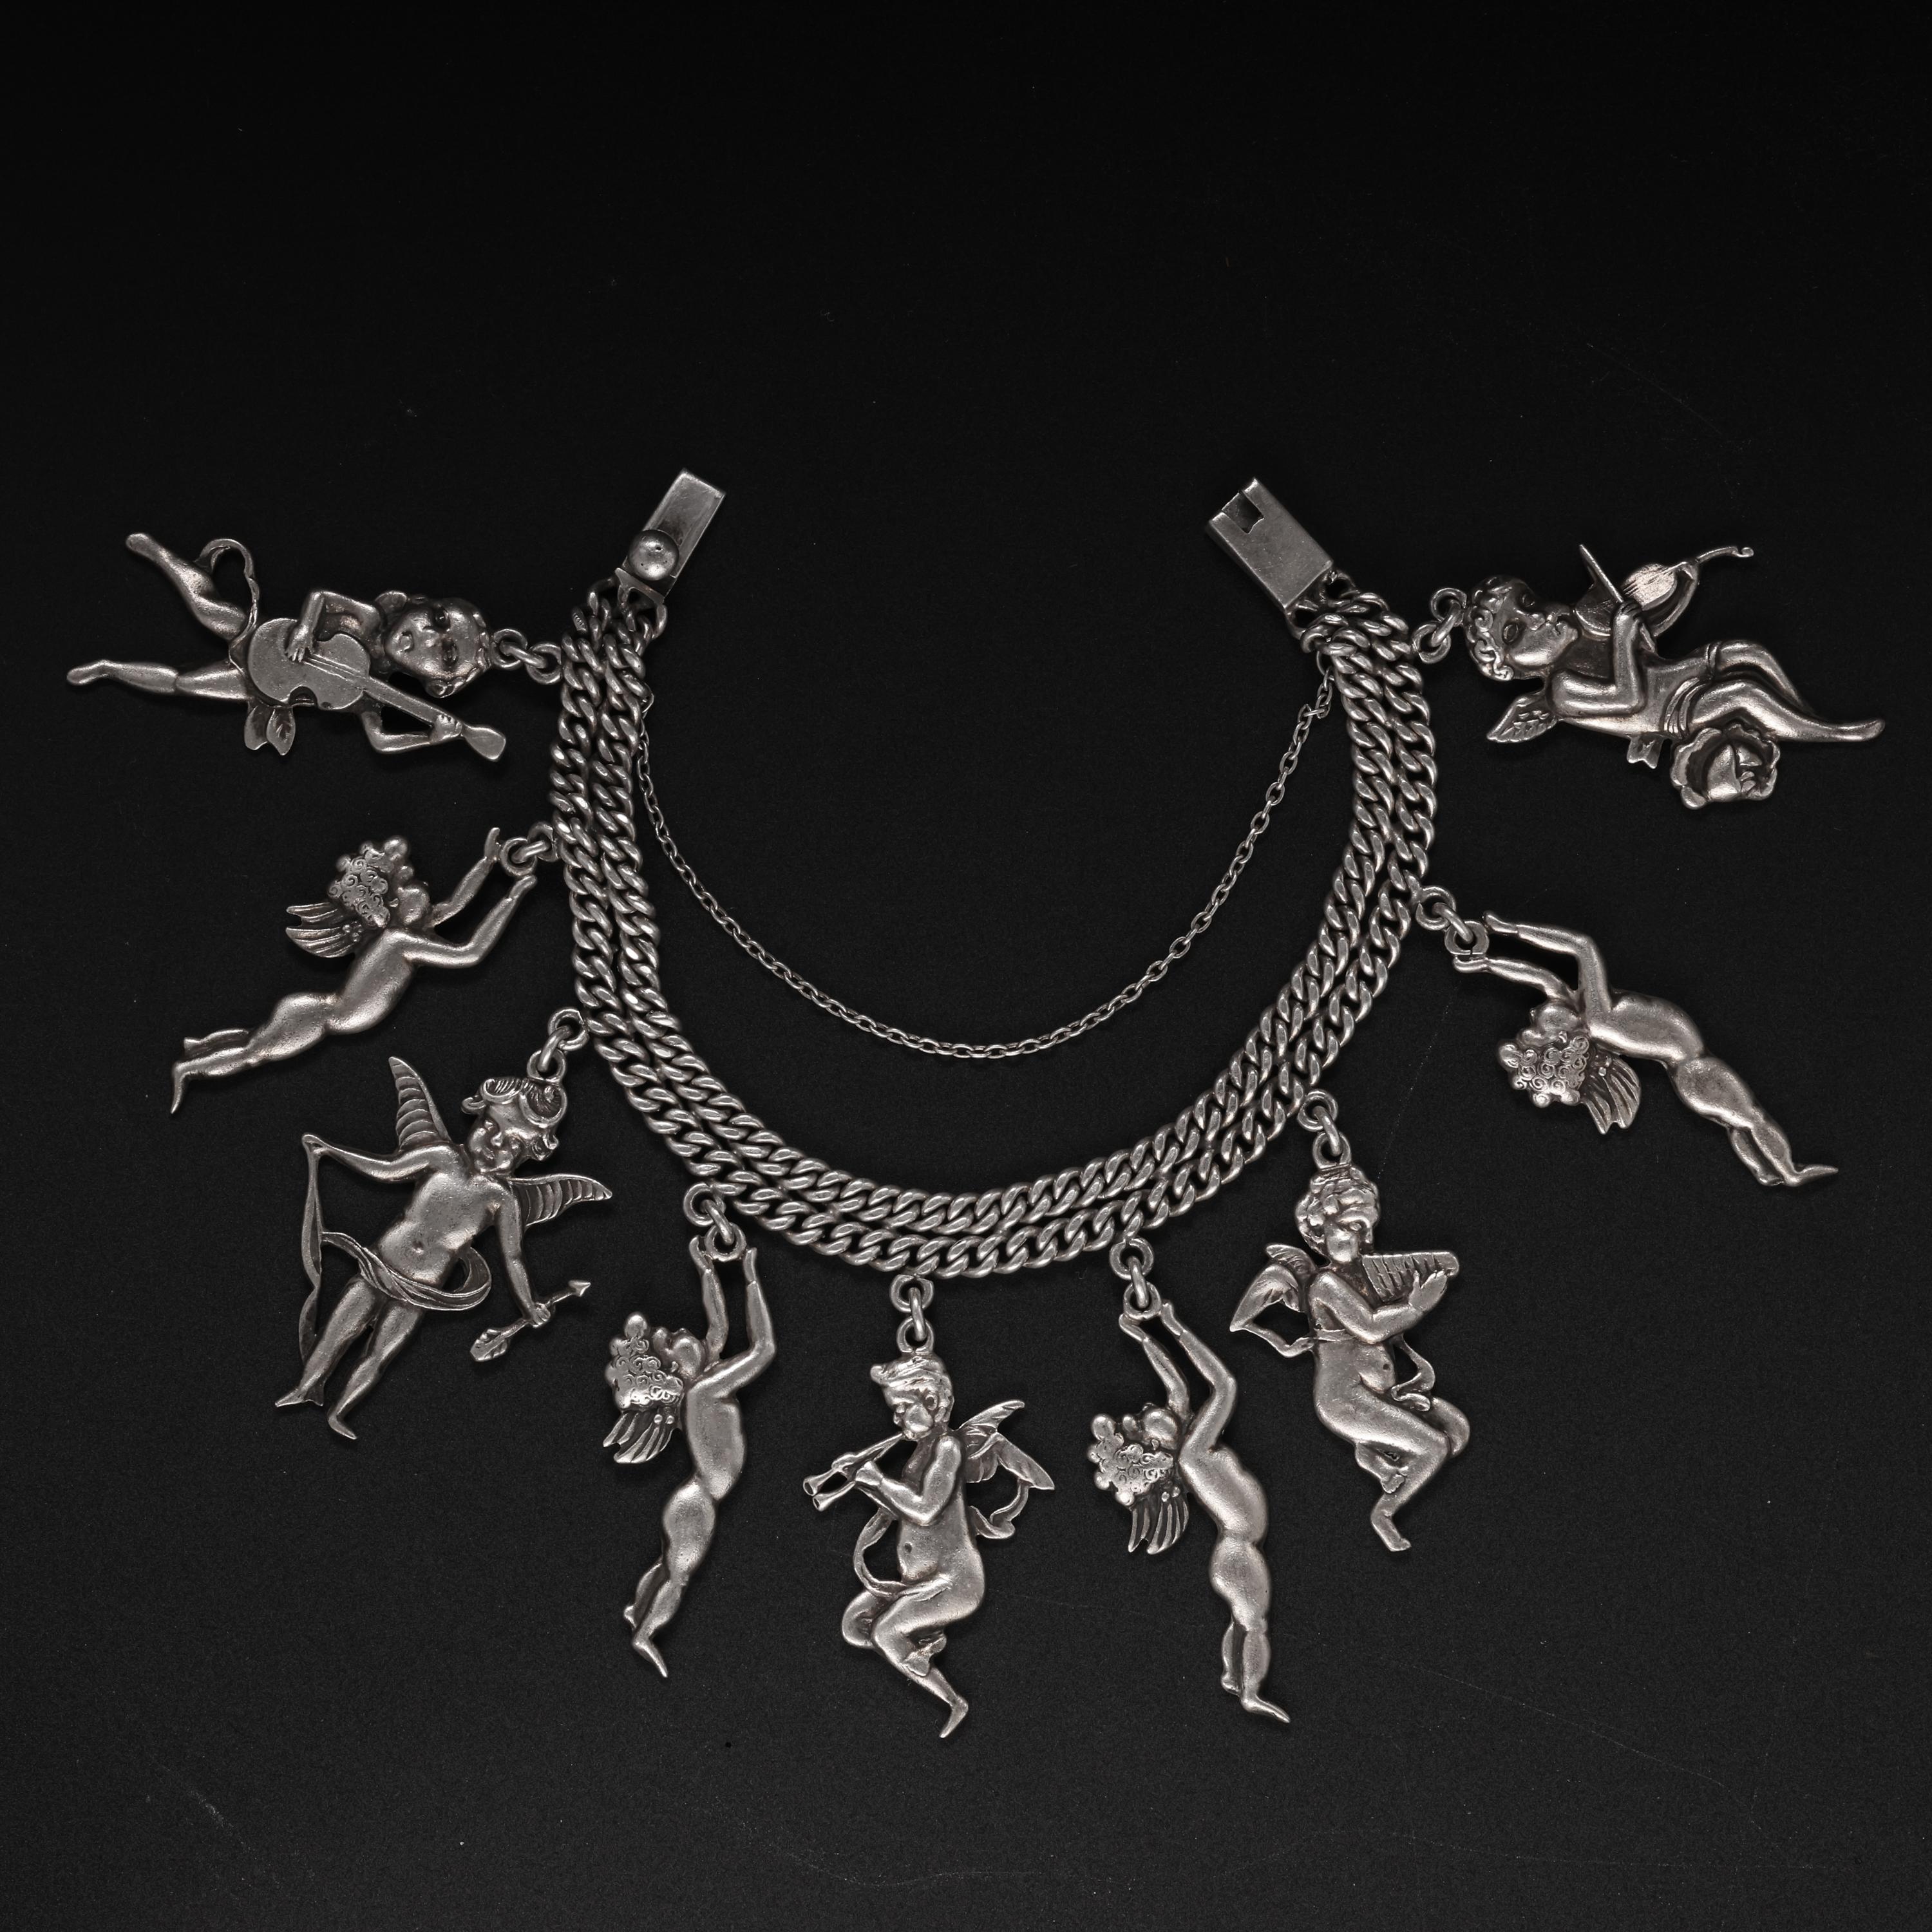 This silver cherub charm bracelet by Margot de Taxco is featured in the book, 